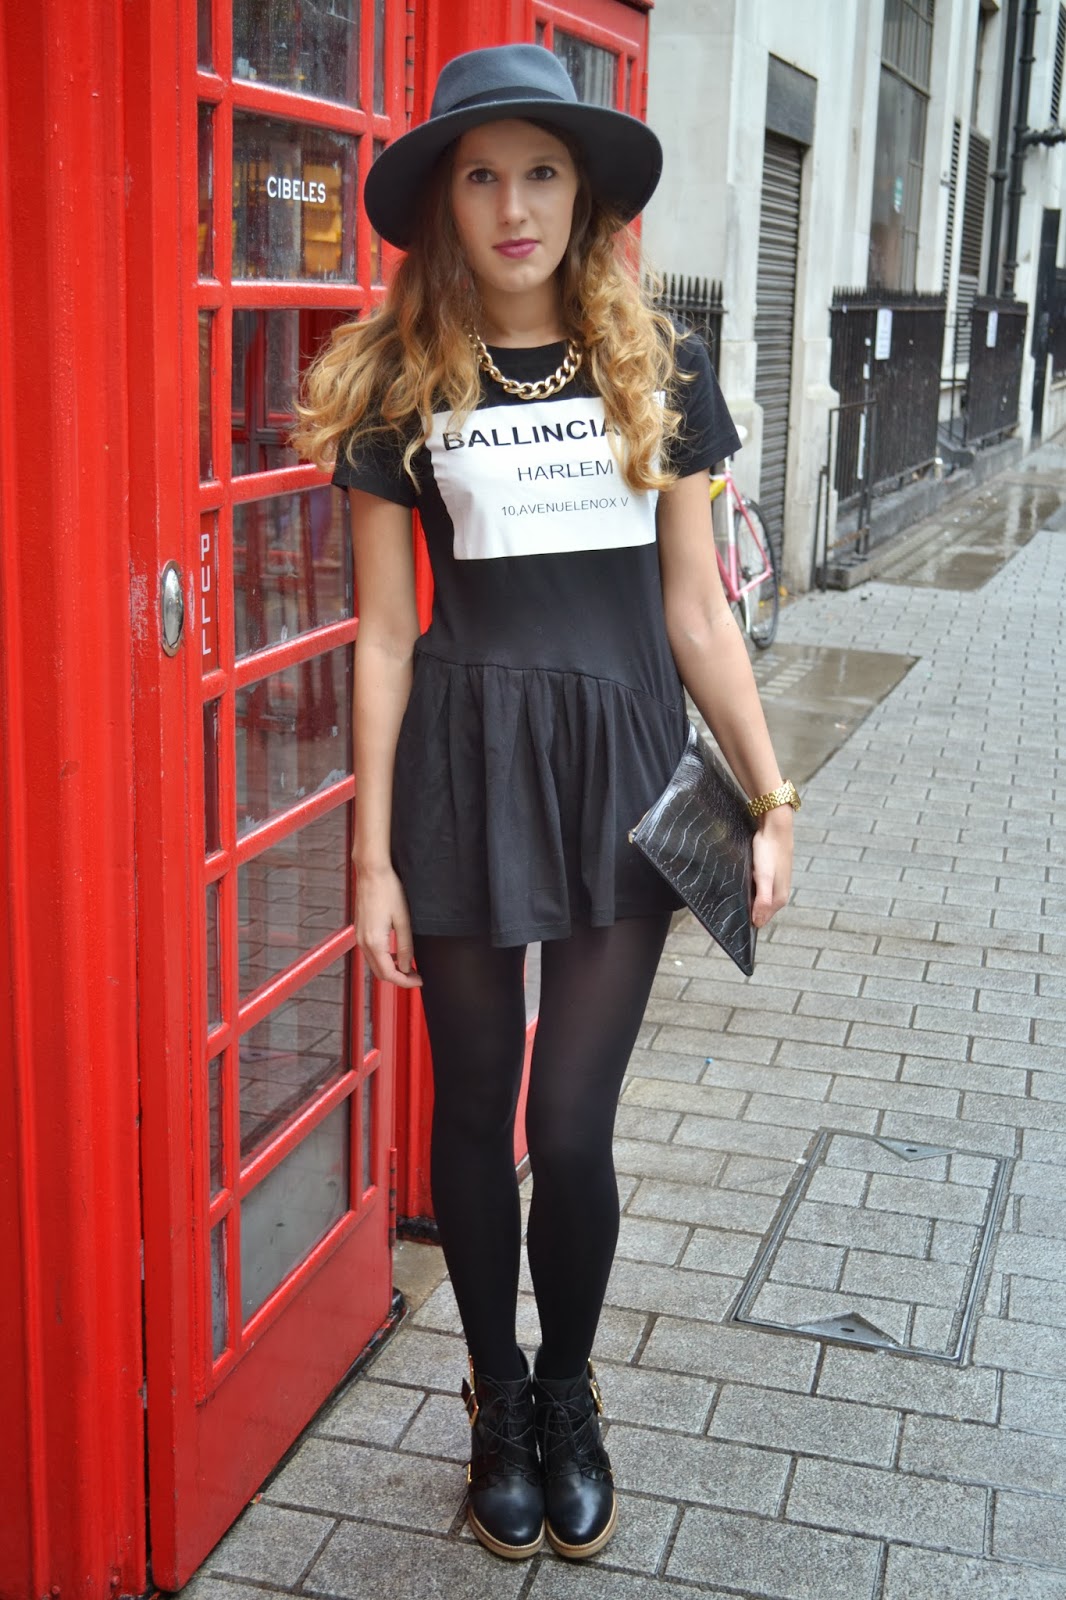 London Calling | What's In Her Wardrobe